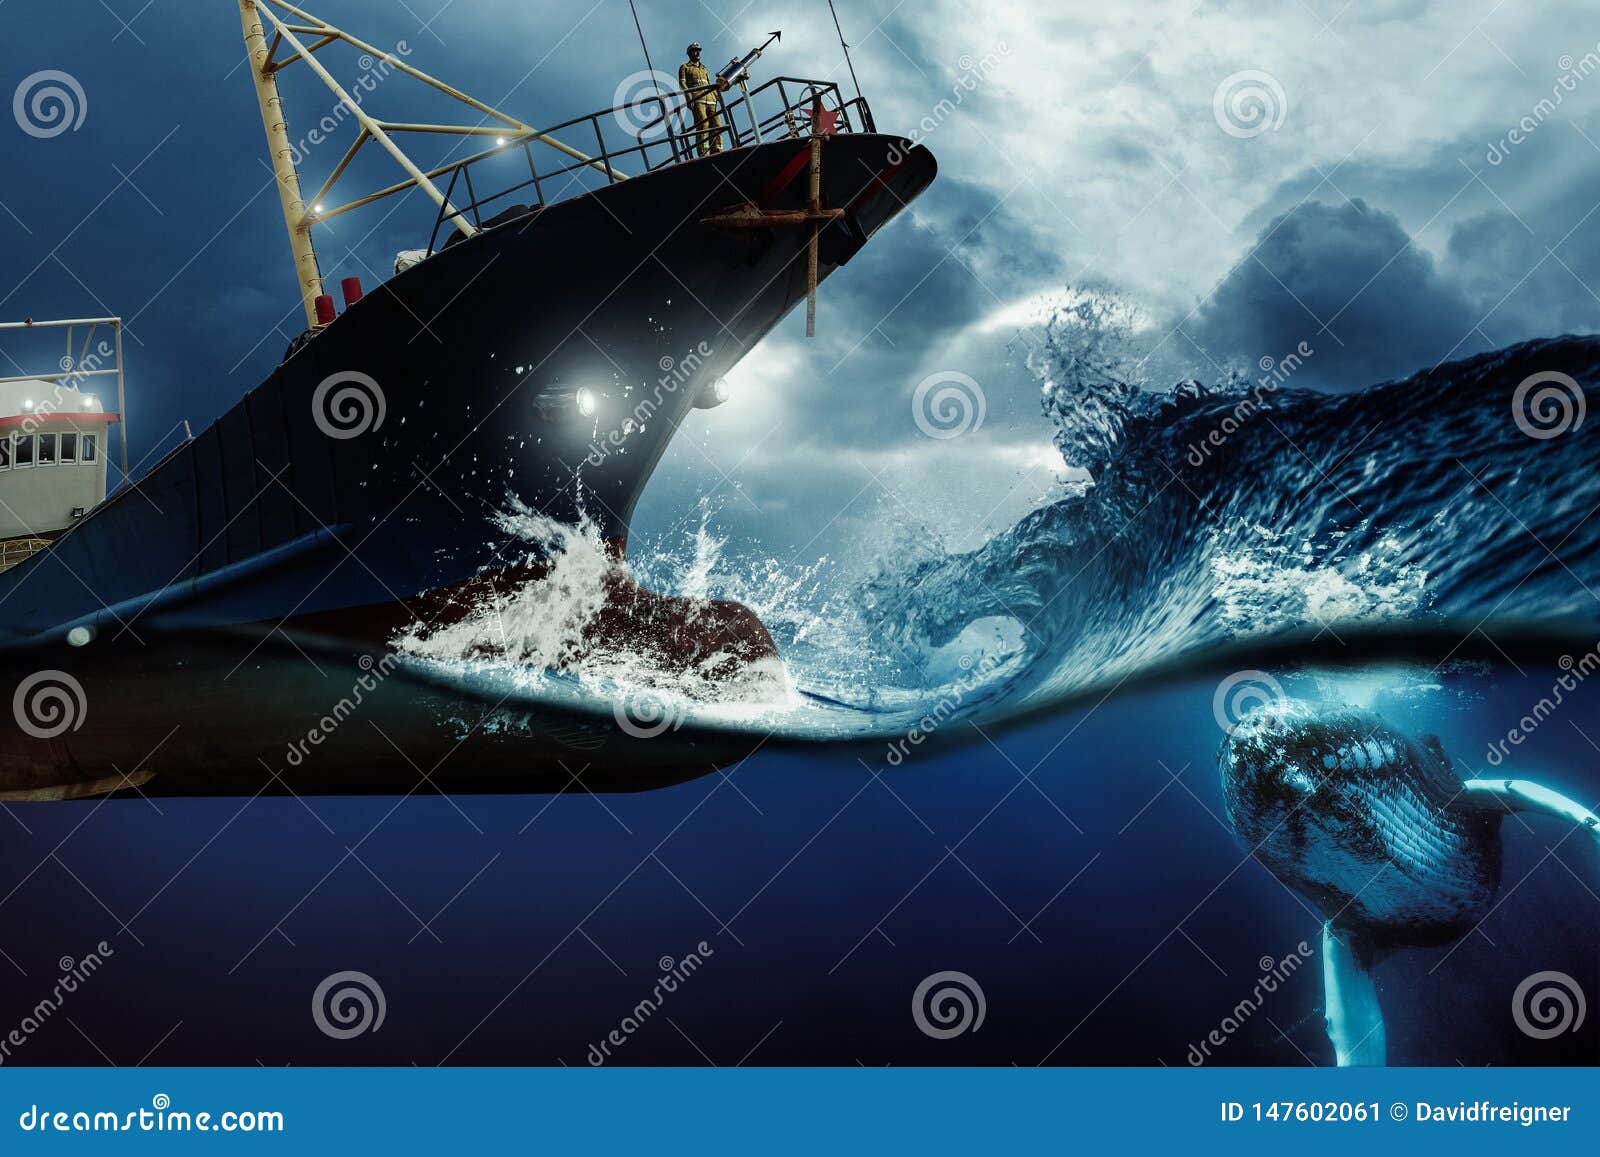 whaler ship hunting a whale at the blue stormy sea . environmental protection and seafare concept